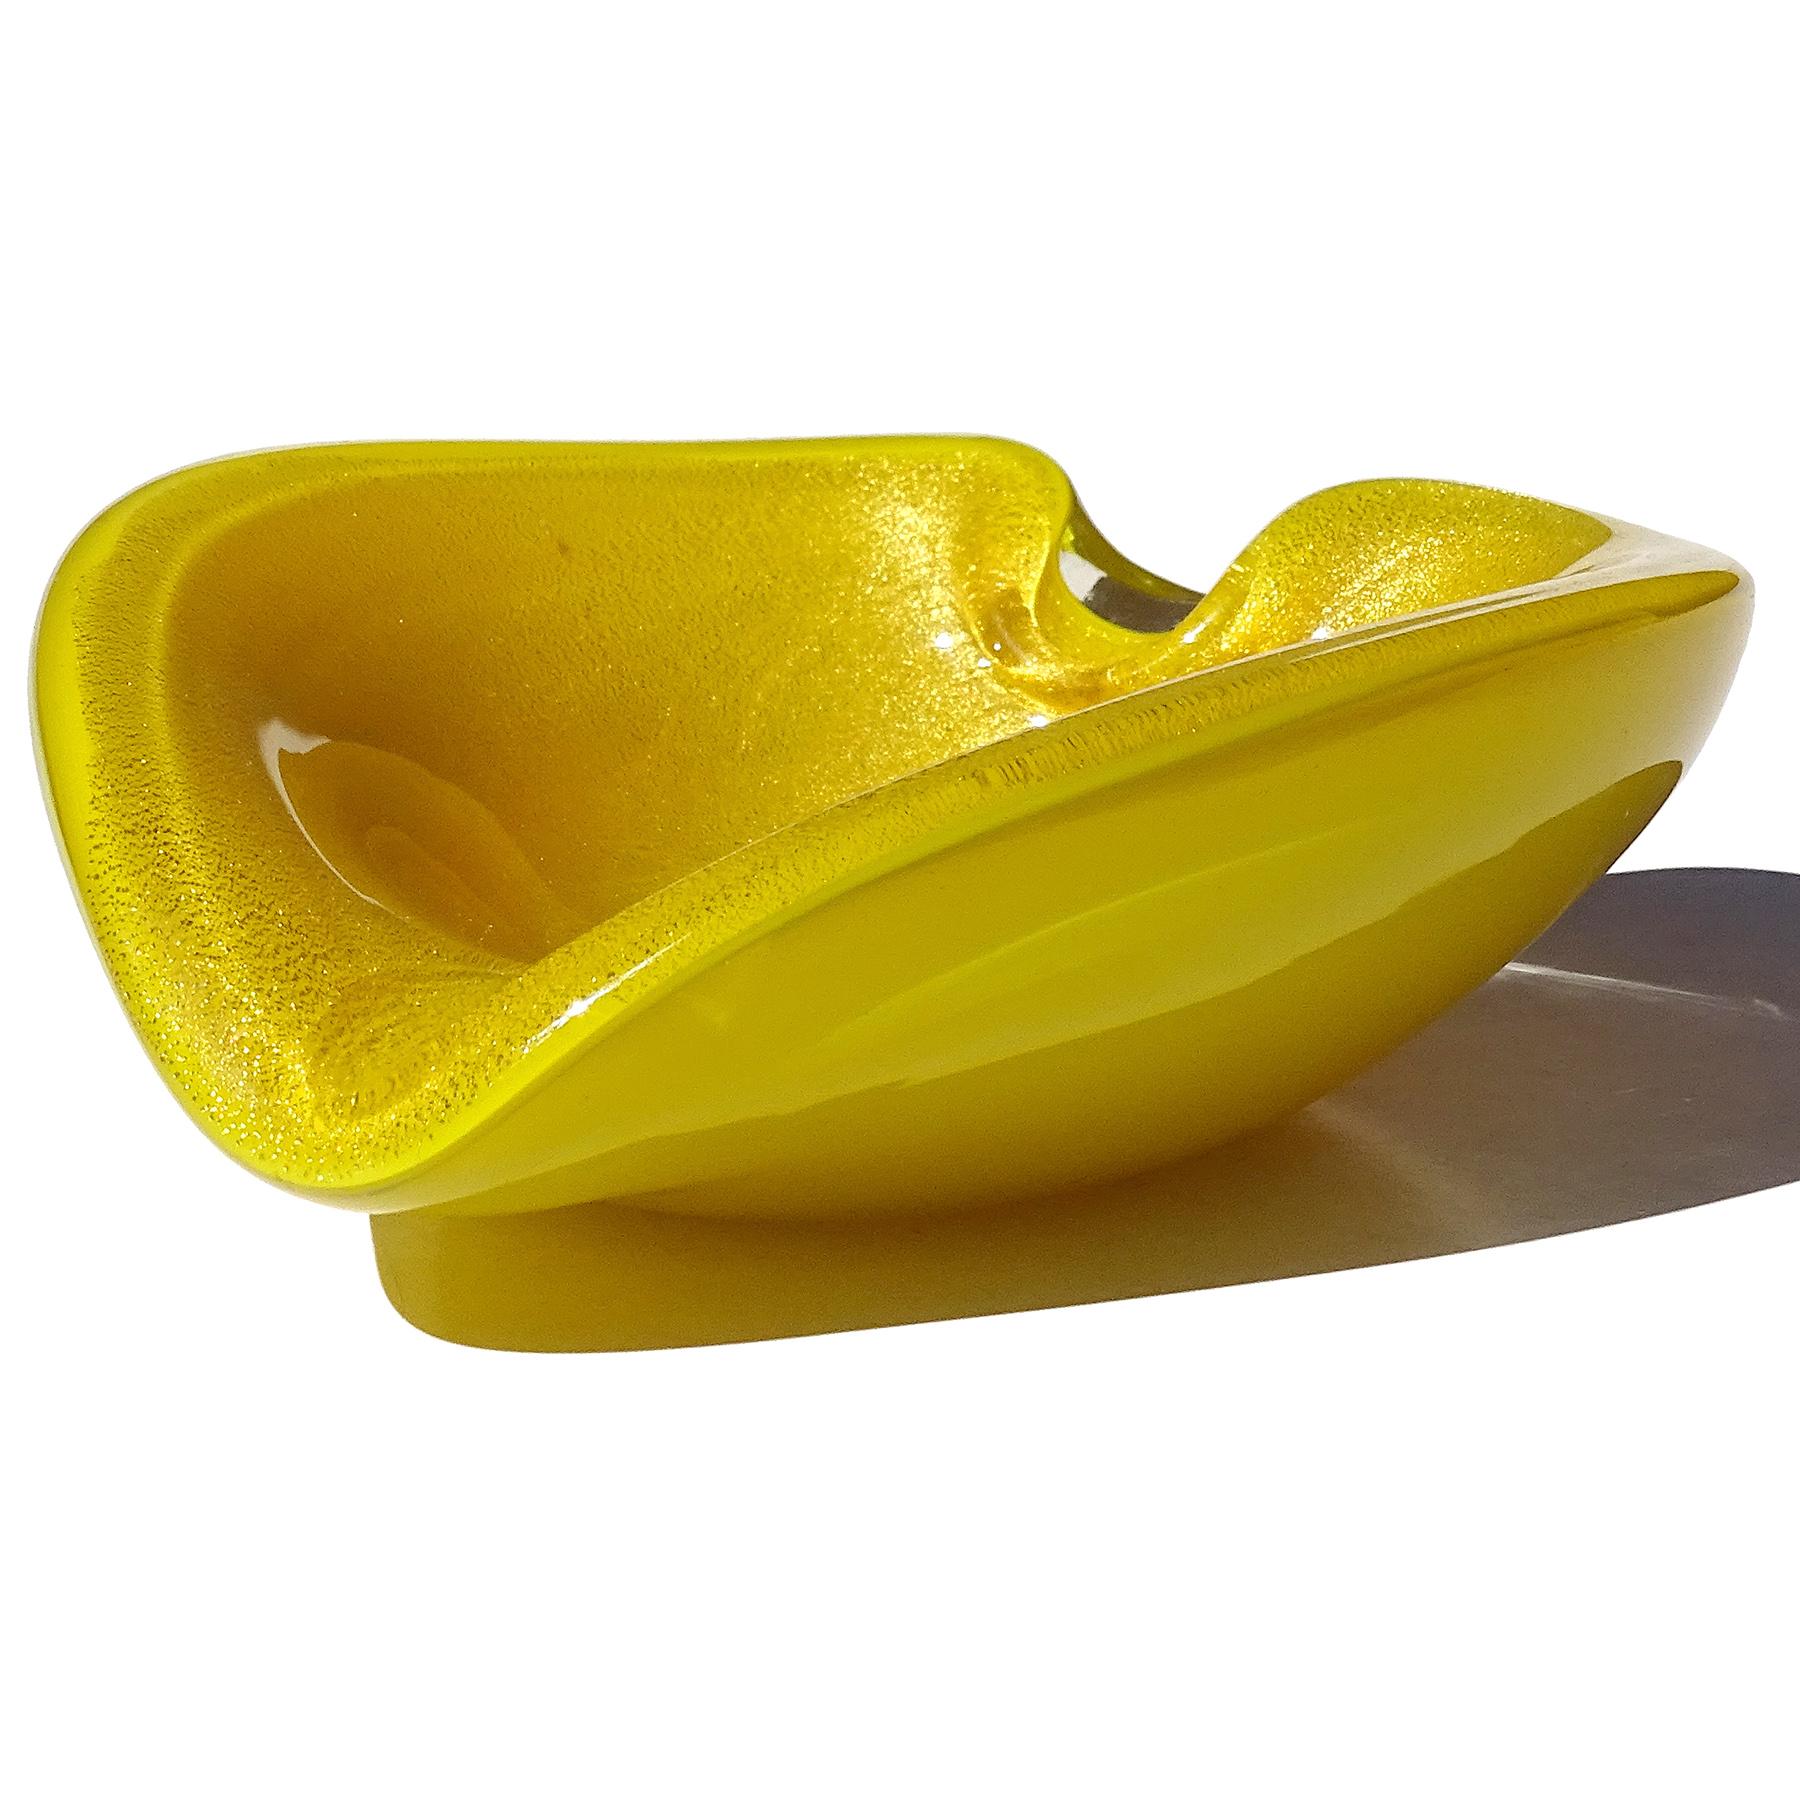 Hand-Crafted Murano Bright Yellow Gold Flecks Vintage Italian Art Glass Heart Bowl Ashtray For Sale